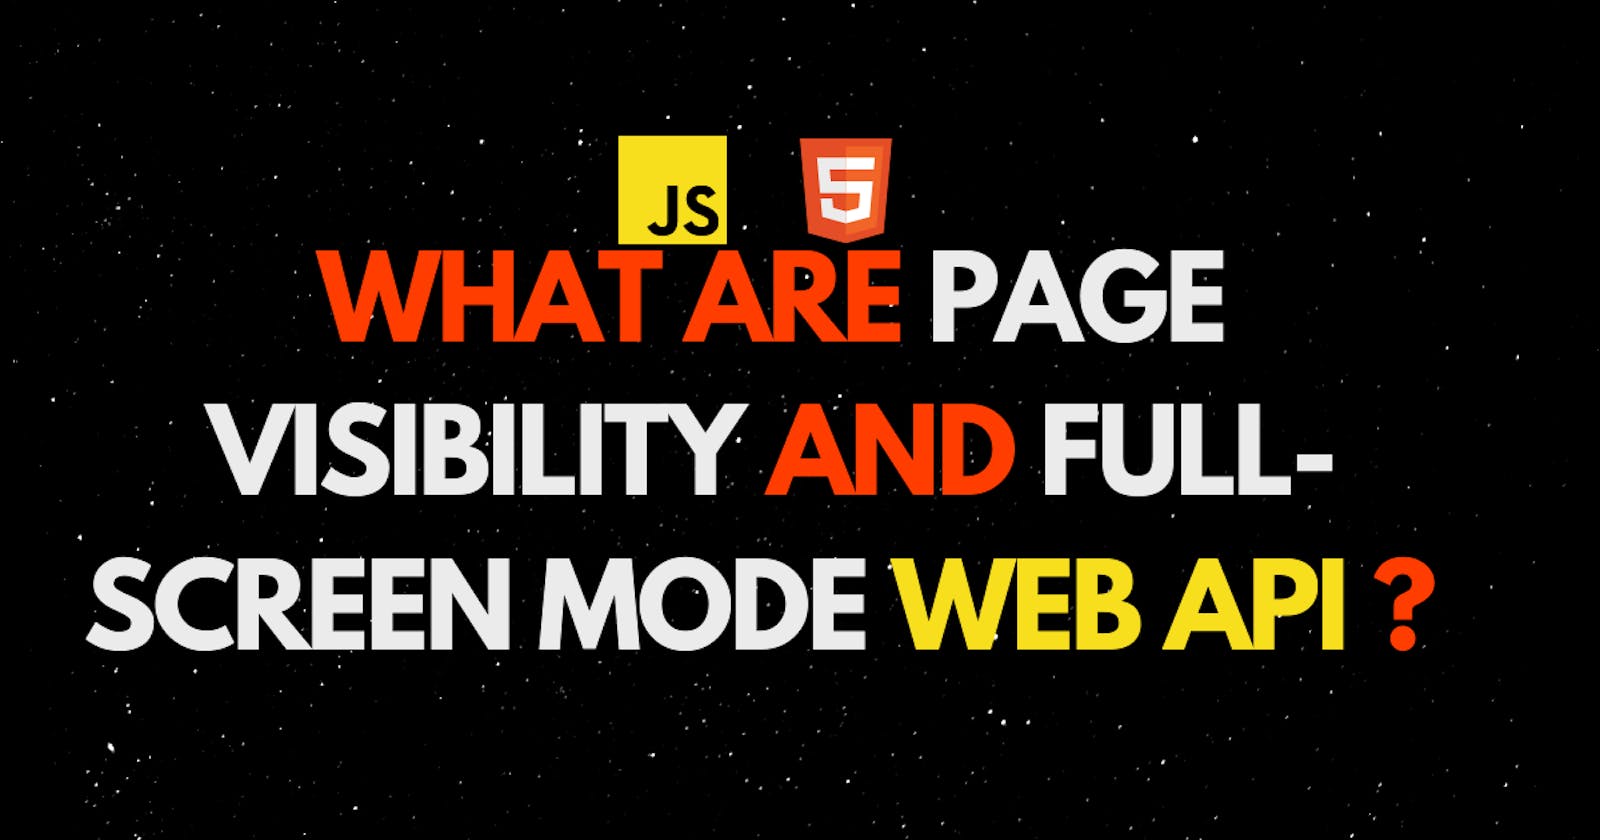 What are Page visibility and full-screen mode WEB API?